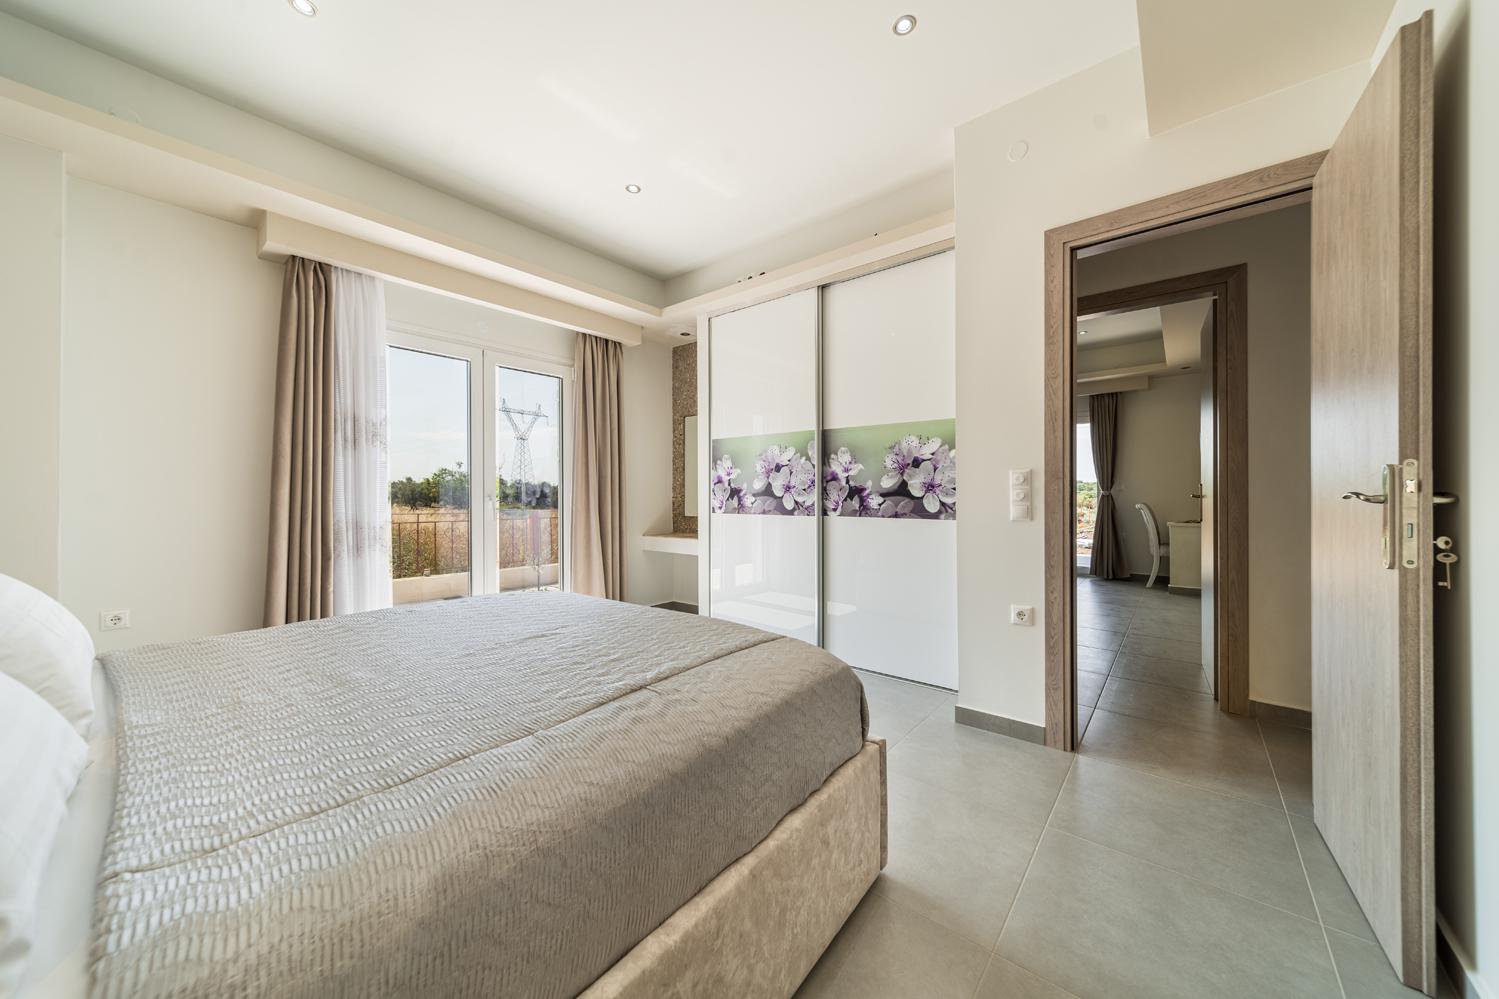 Double bedroom with A/C , en suite bathroom and terrace access with panoramic views